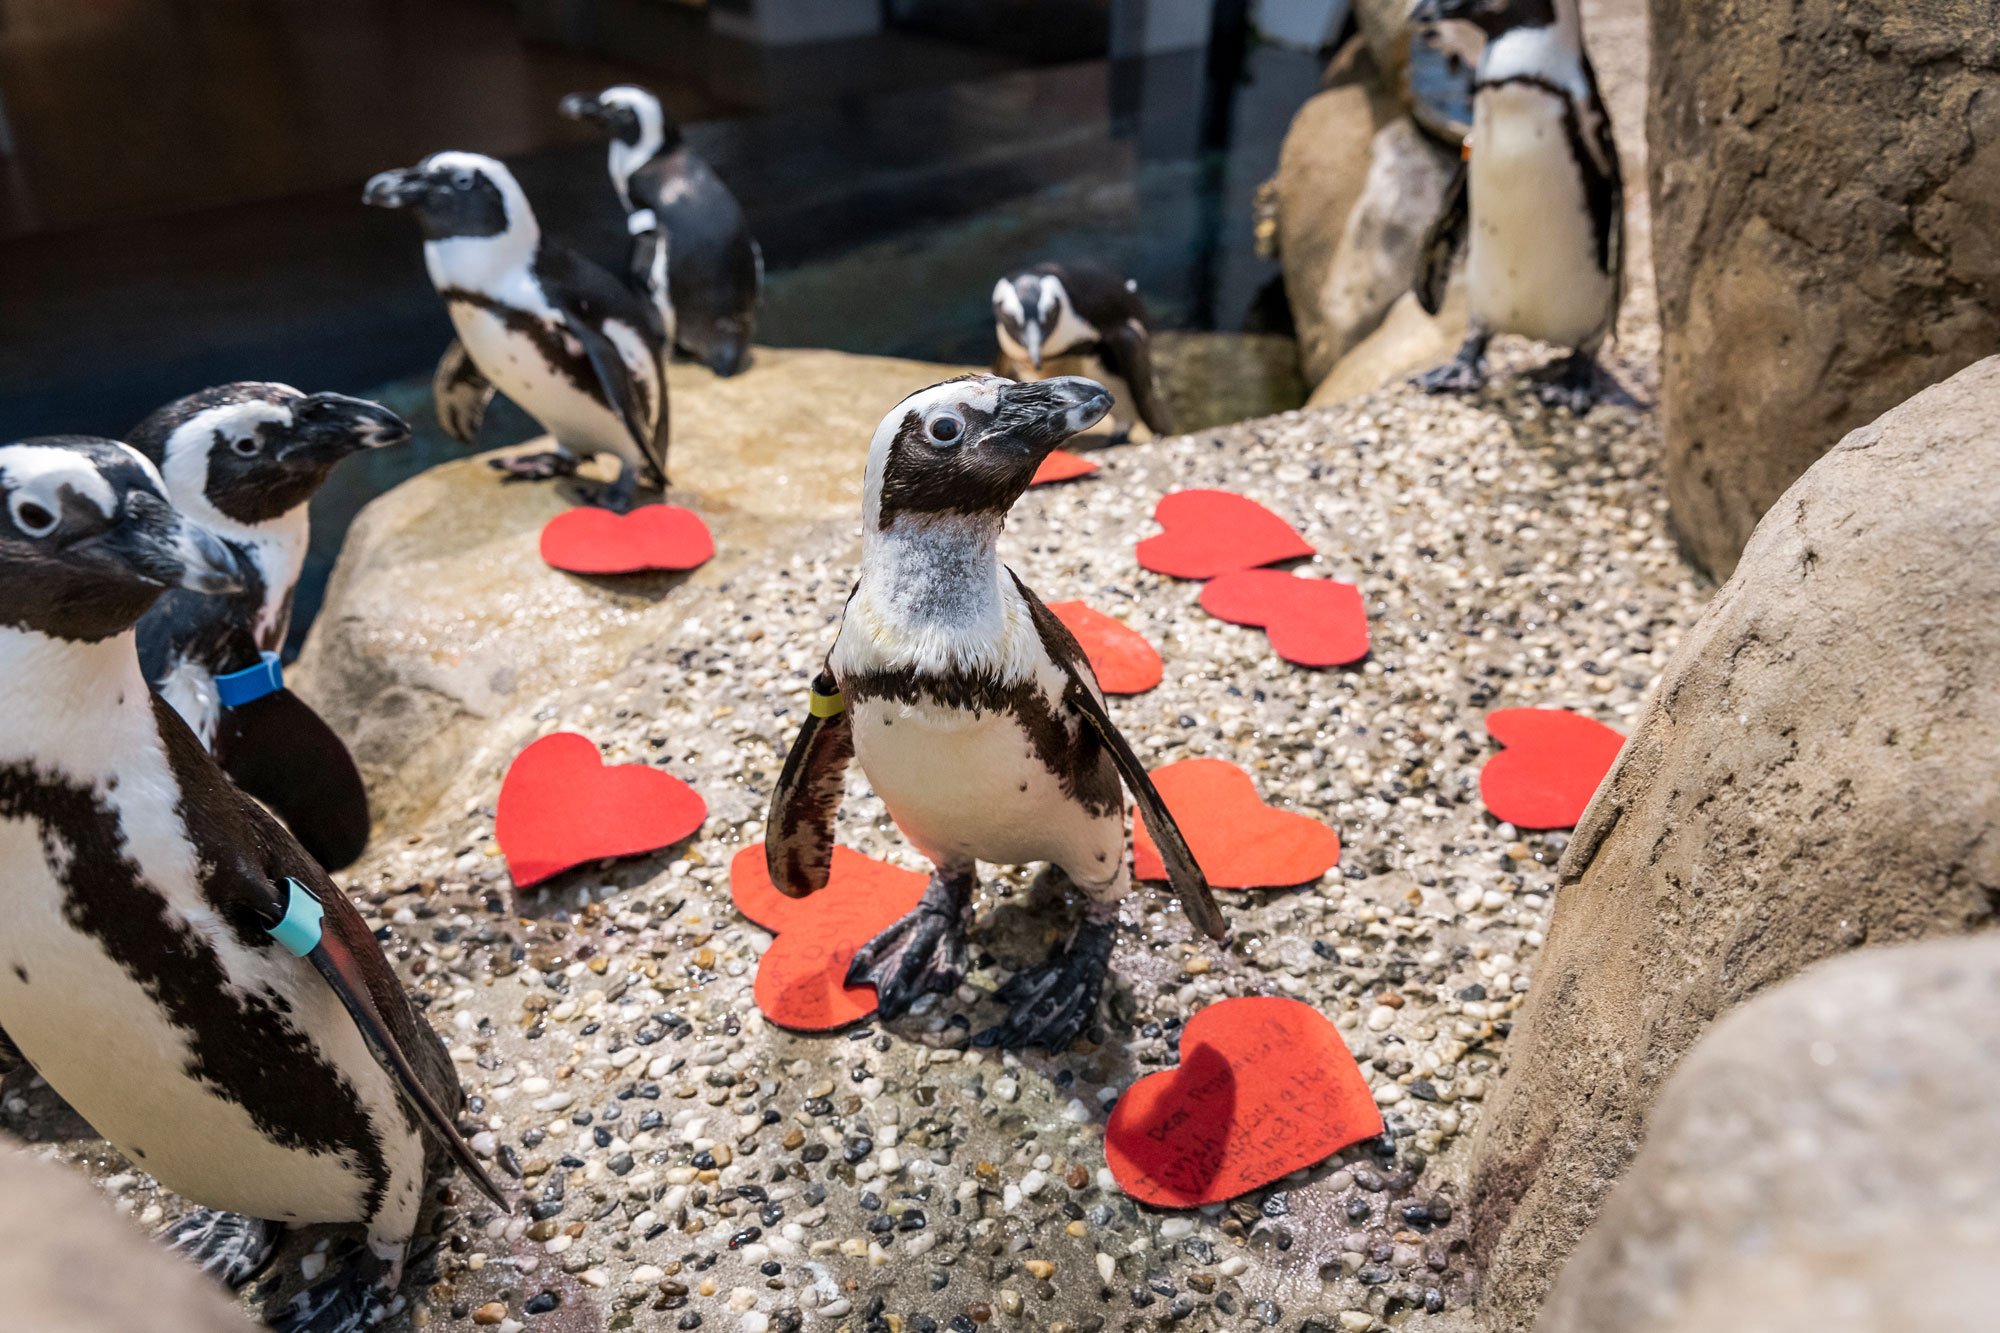 Multiple penguins stand on rocks with red felt hearts at their feet